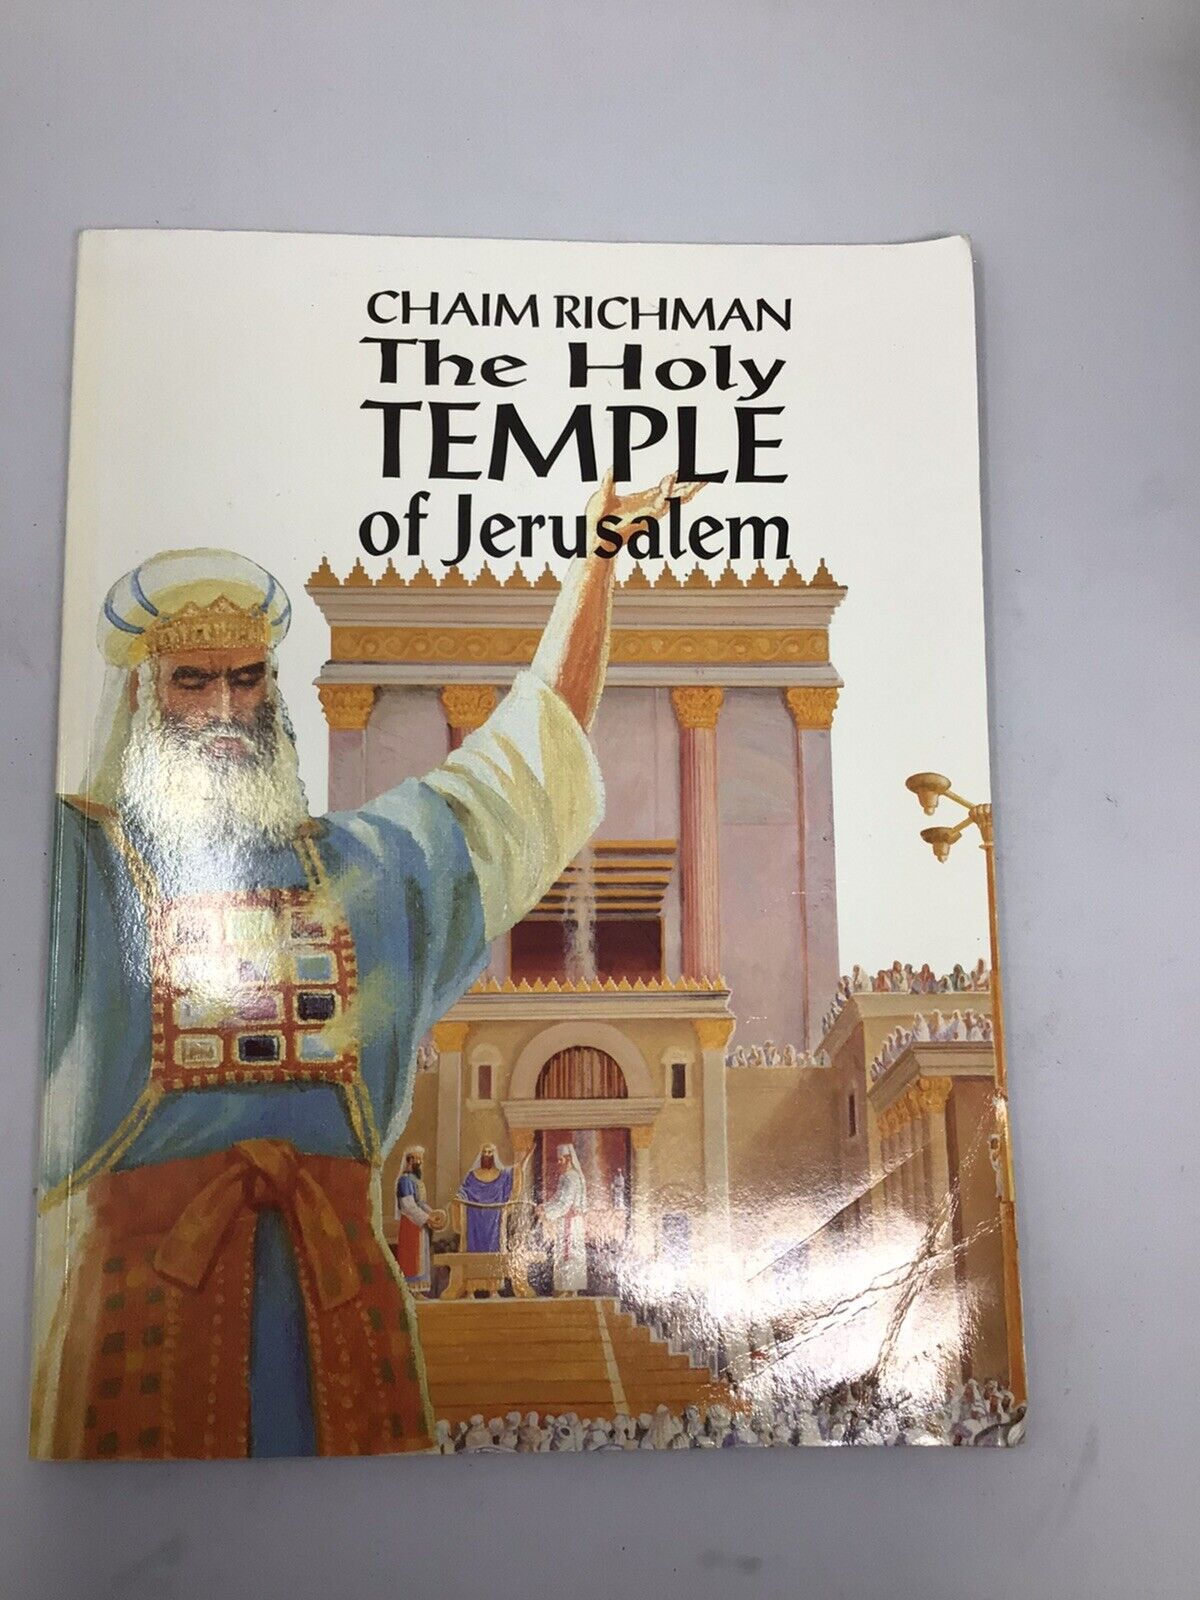 The Holy Temple of Jerusalem by Chaim Richman